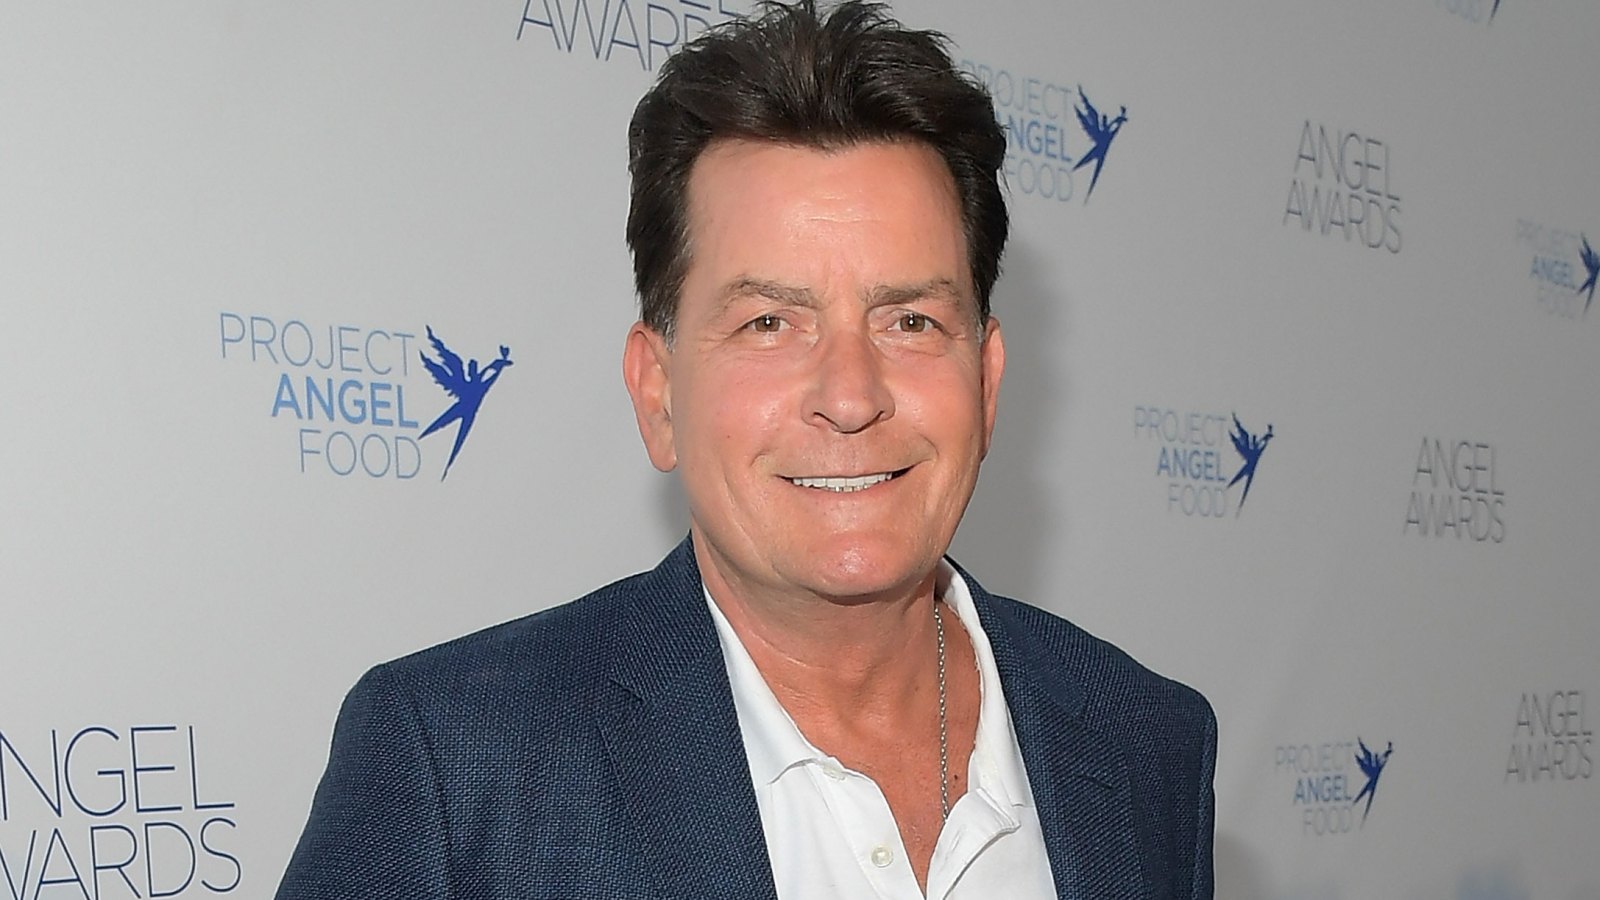 Charlie Sheen I Would Do a Two and a Half Men Reboot for Closure